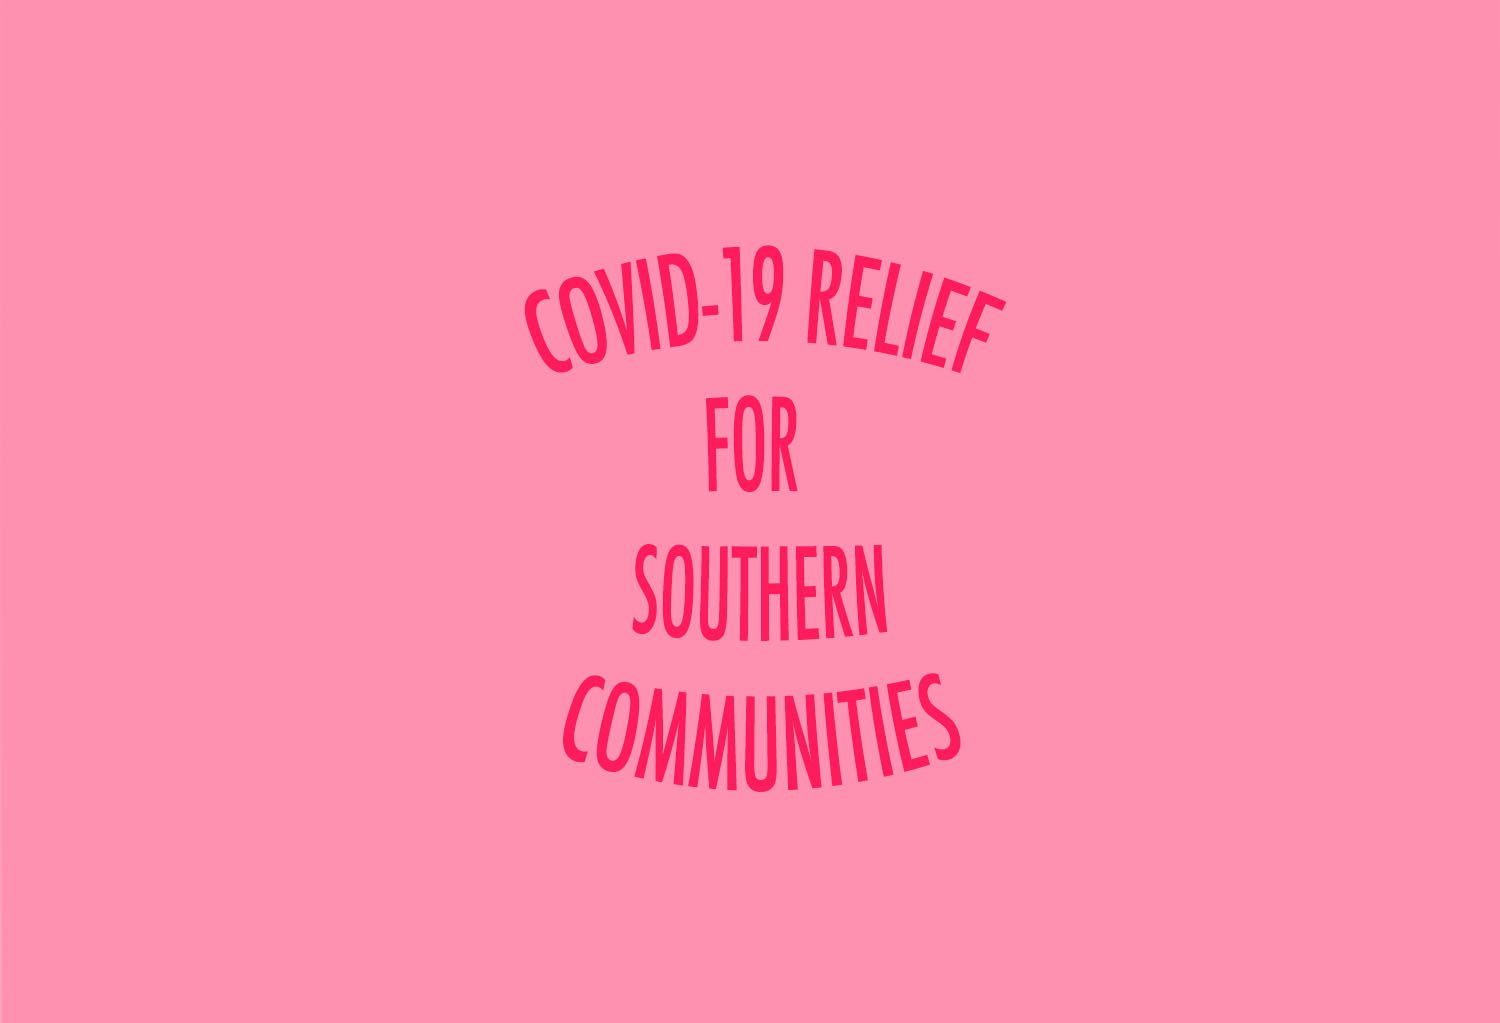 This Organization Is Launching Initiatives For Black Women During The COVID-19 Pandemic